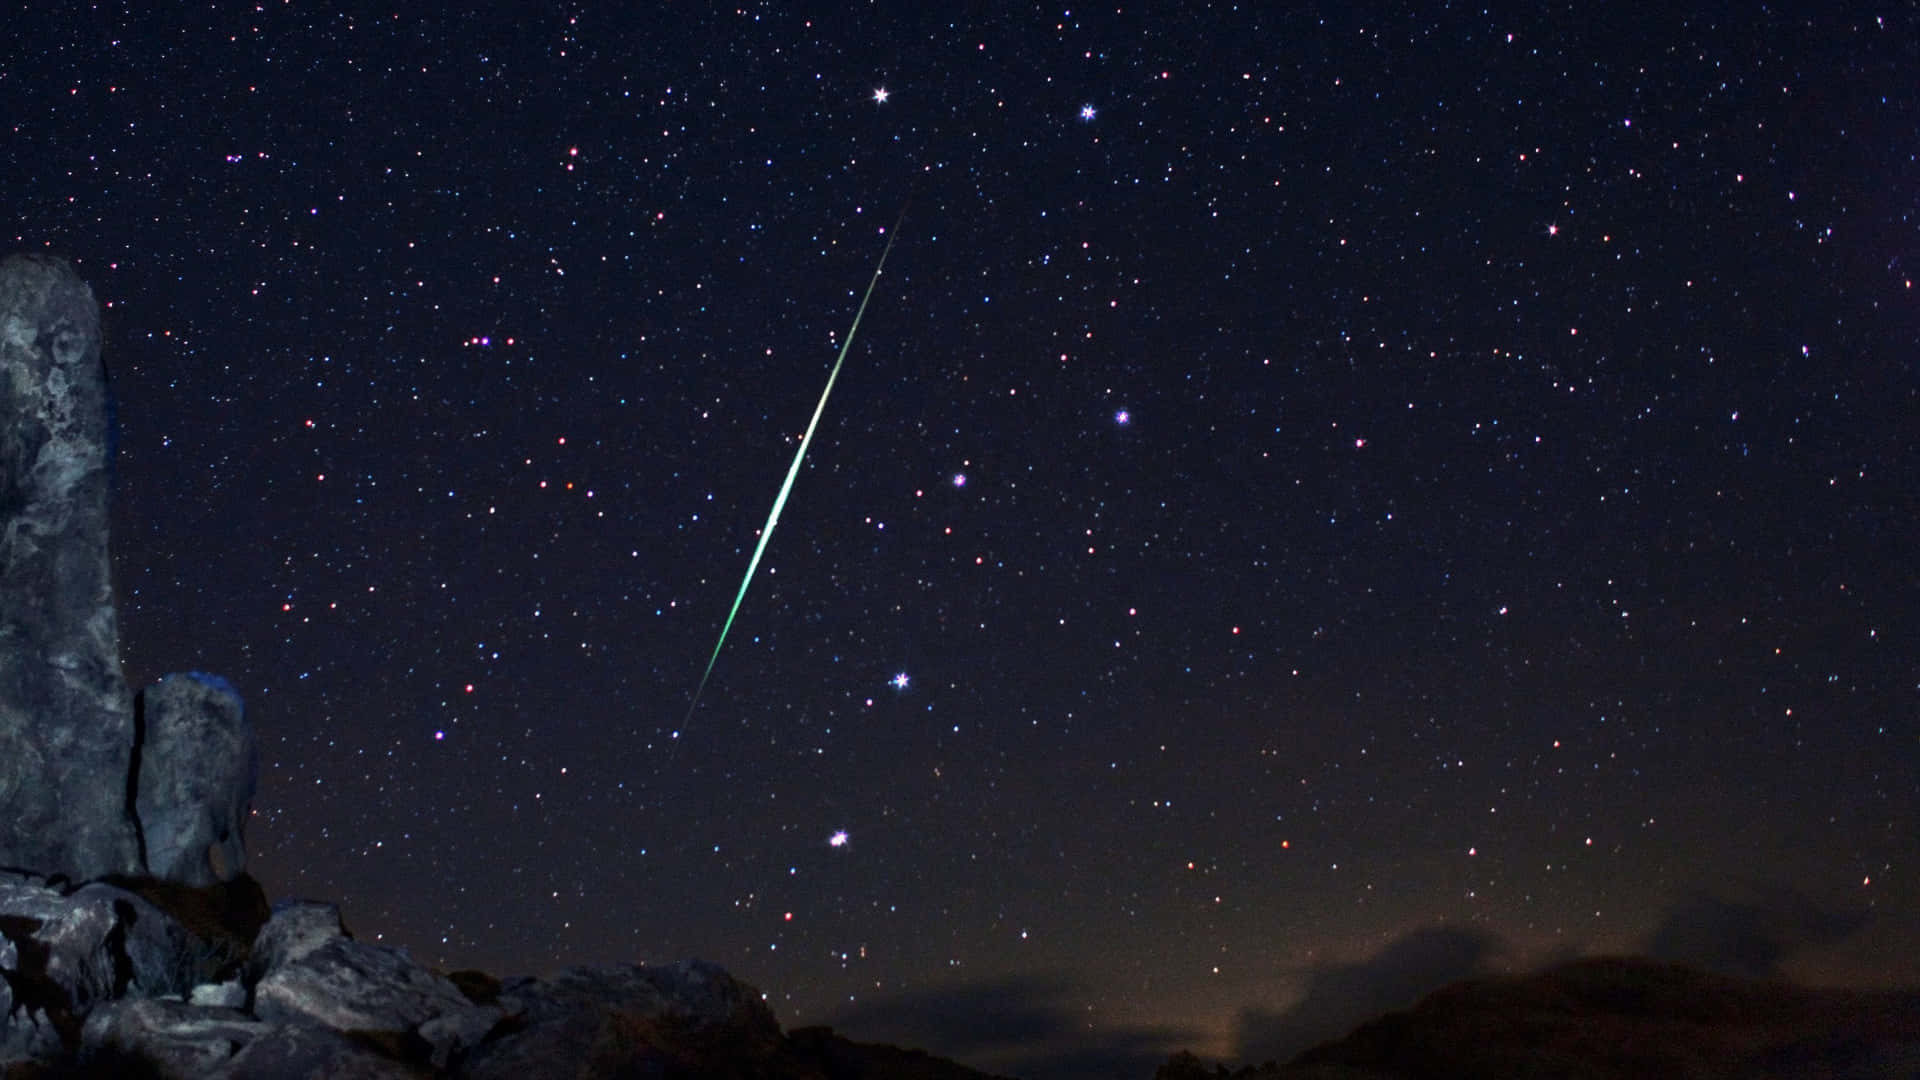 The Meteor Shower Lights Up the Sky